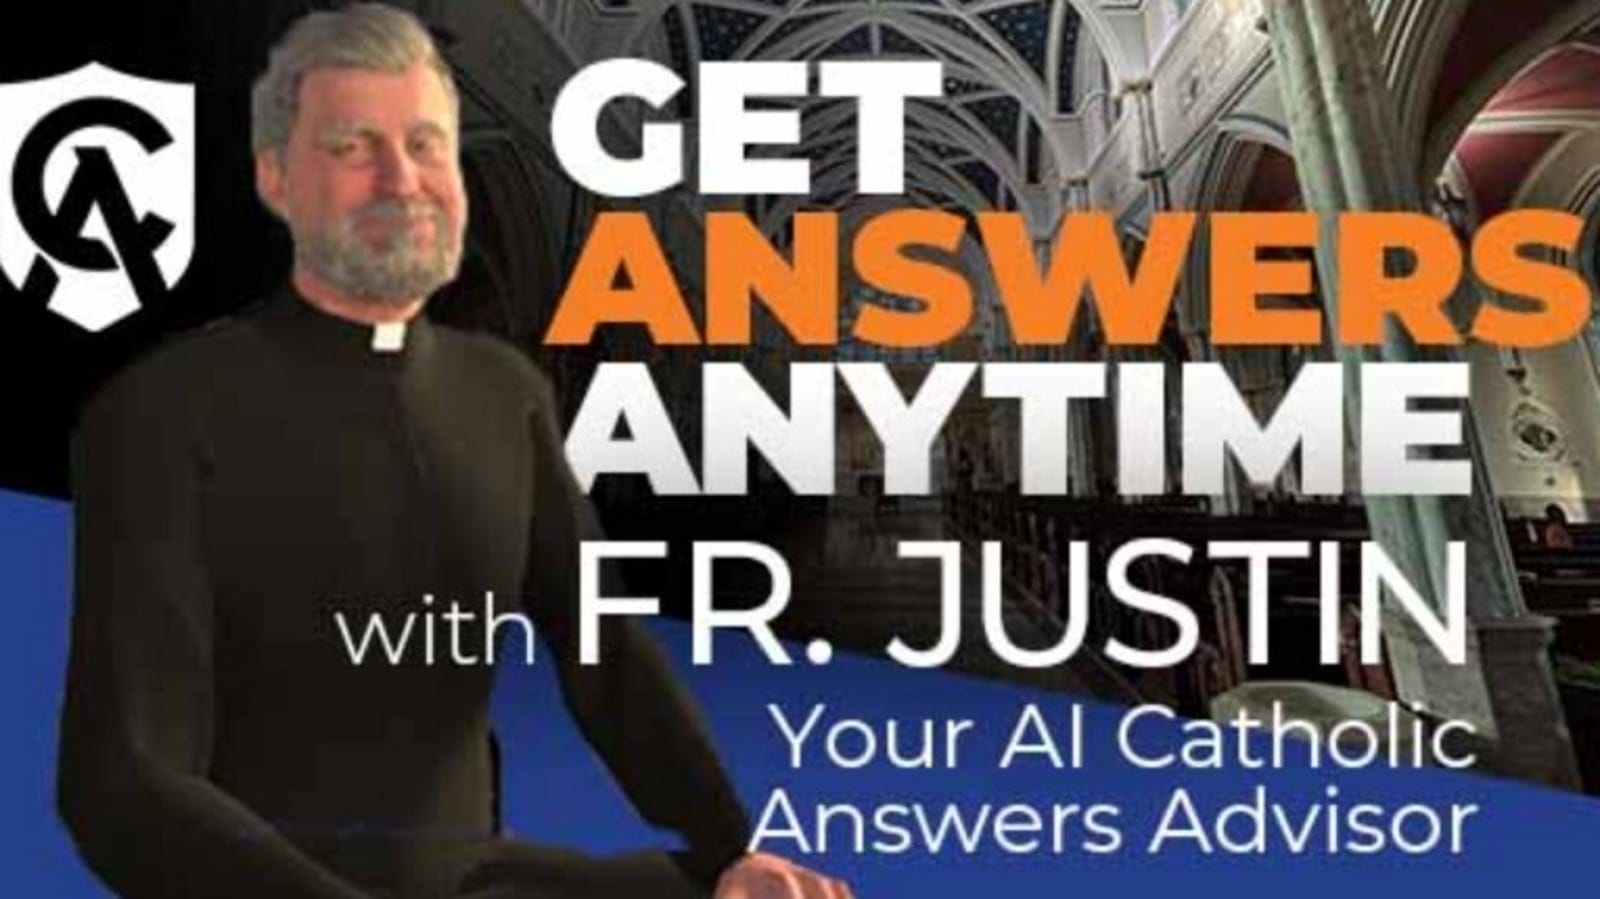 AI priest claims to be real, says it’s ok to ‘baptise babies in Gatorade’. Catholic group scraps it